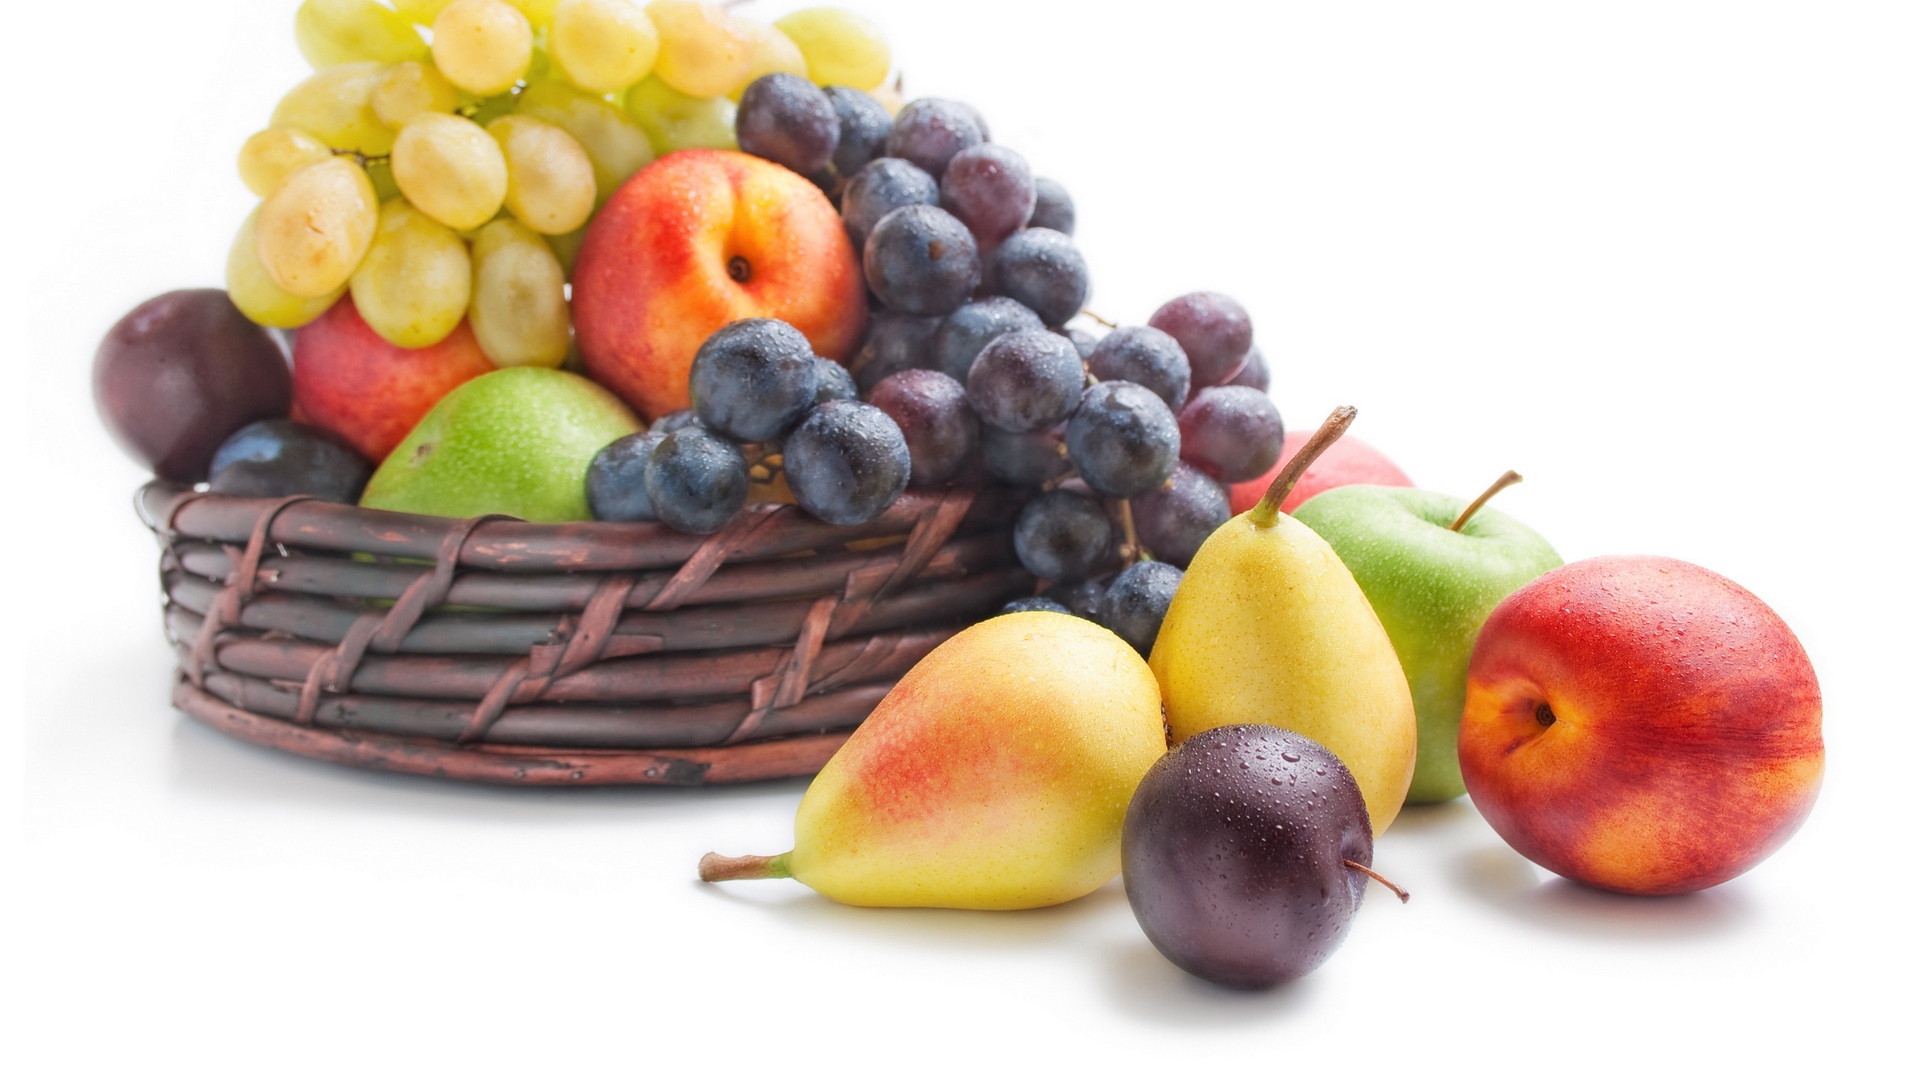 Apples Pears Nectarines Grapes Plums Berries Fruits With White